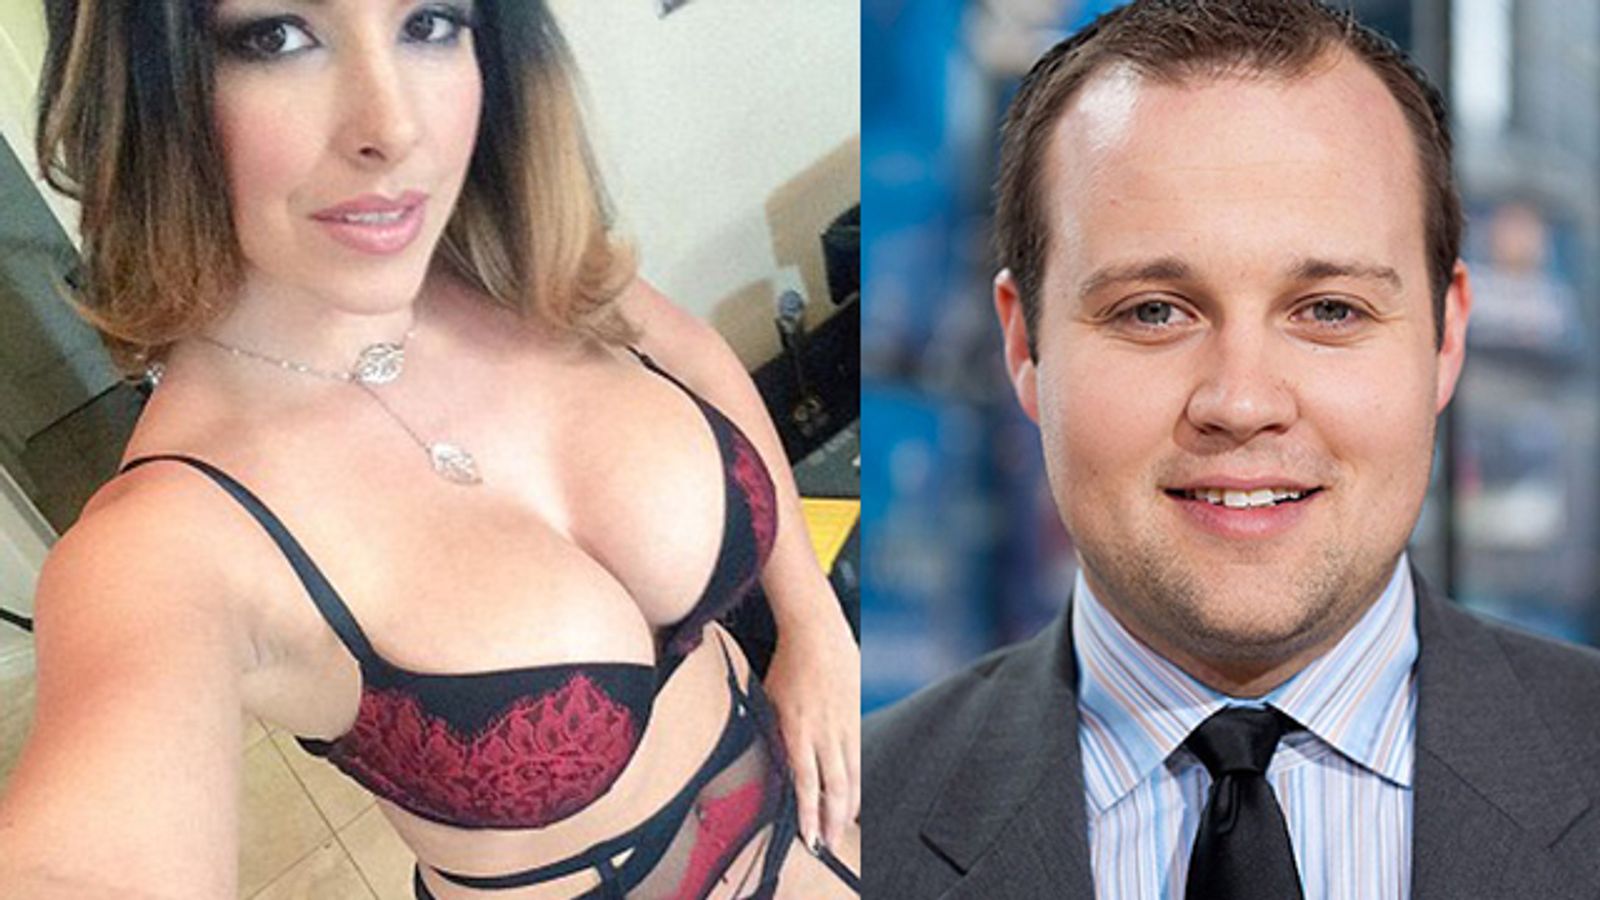 Philly Federal Judge Bounces Josh Duggar's Motion to Compel